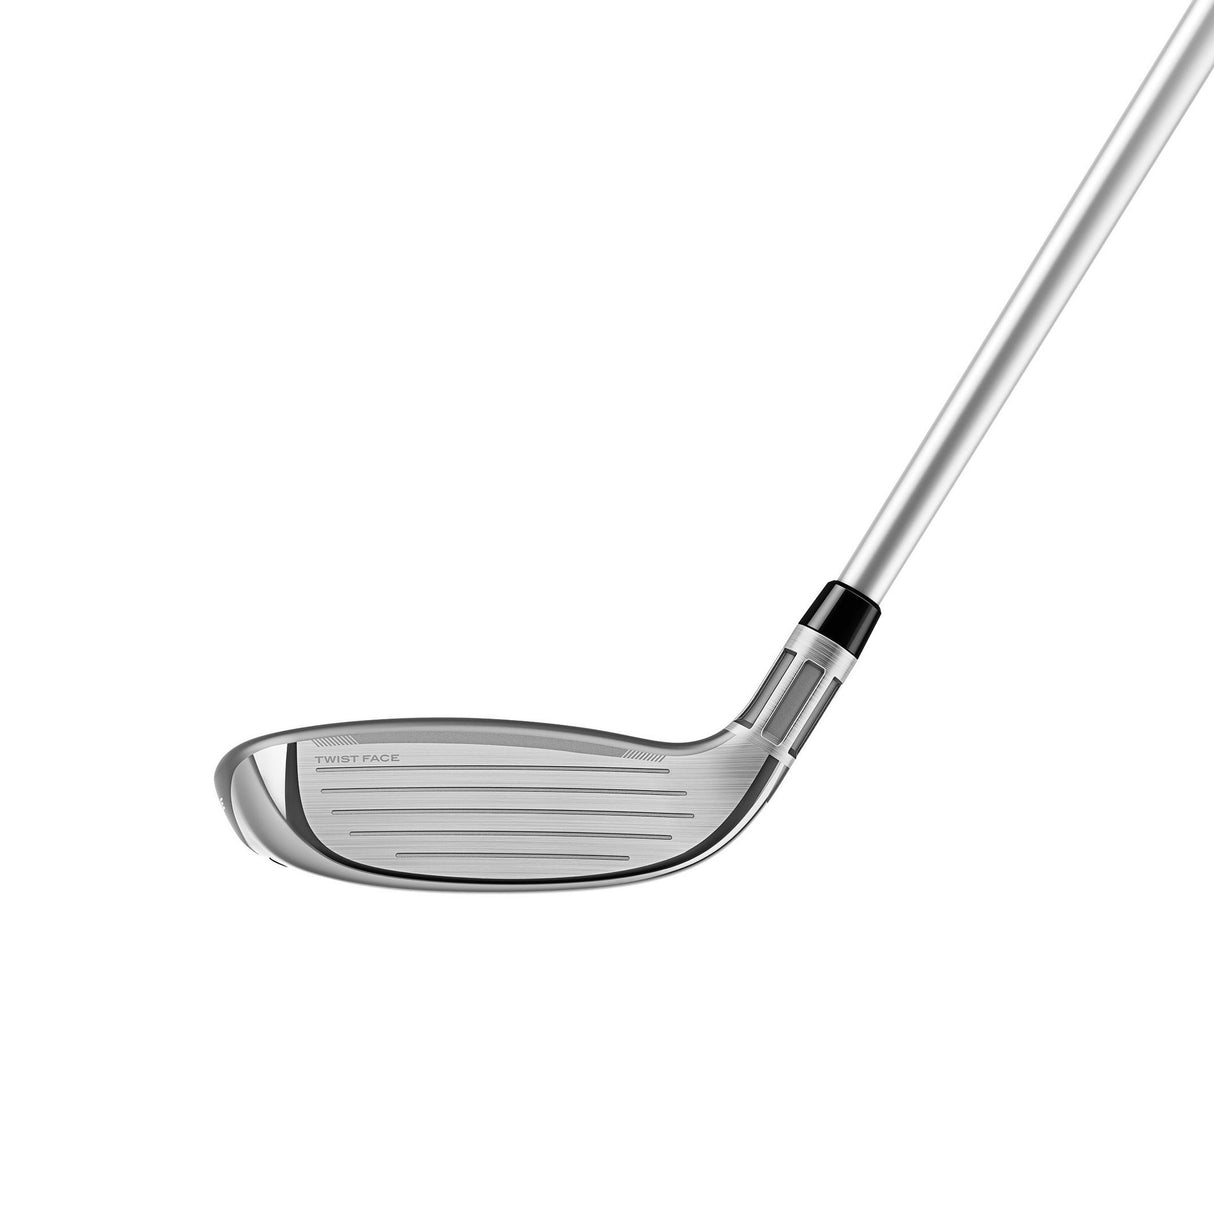 TaylorMade Stealth 2 Women's Rescue - Niagara Golf Warehouse TAYLORMADE HYBRIDS